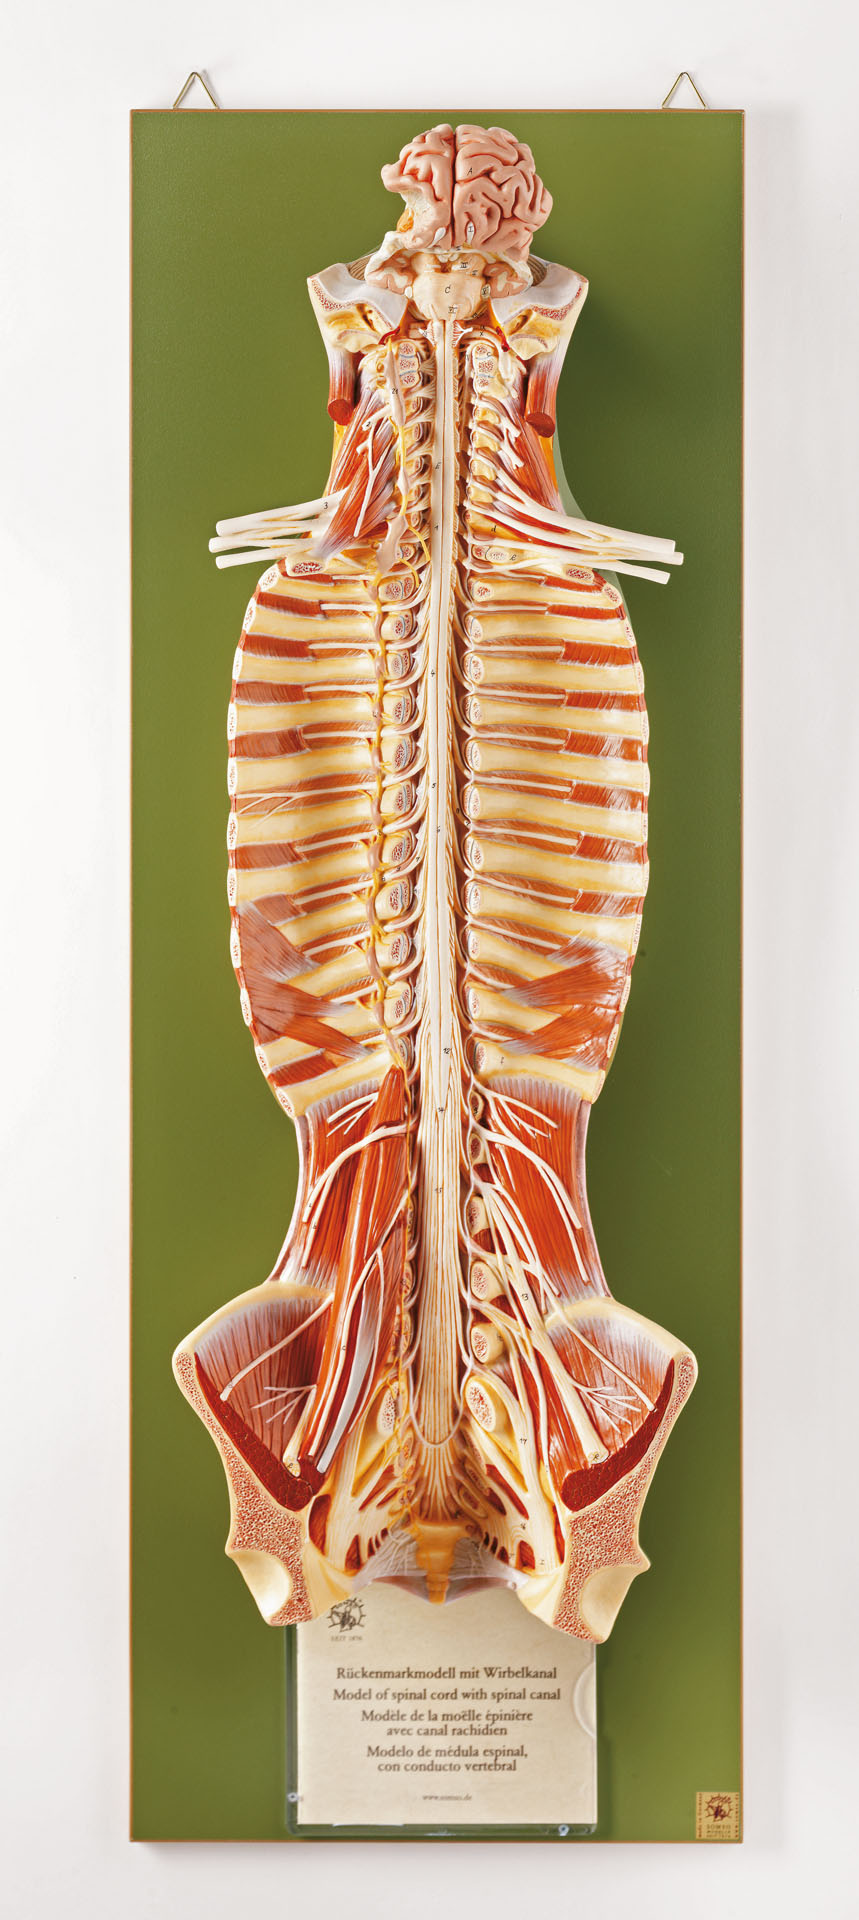 Spinal Cord in the Spinal Canal, Light